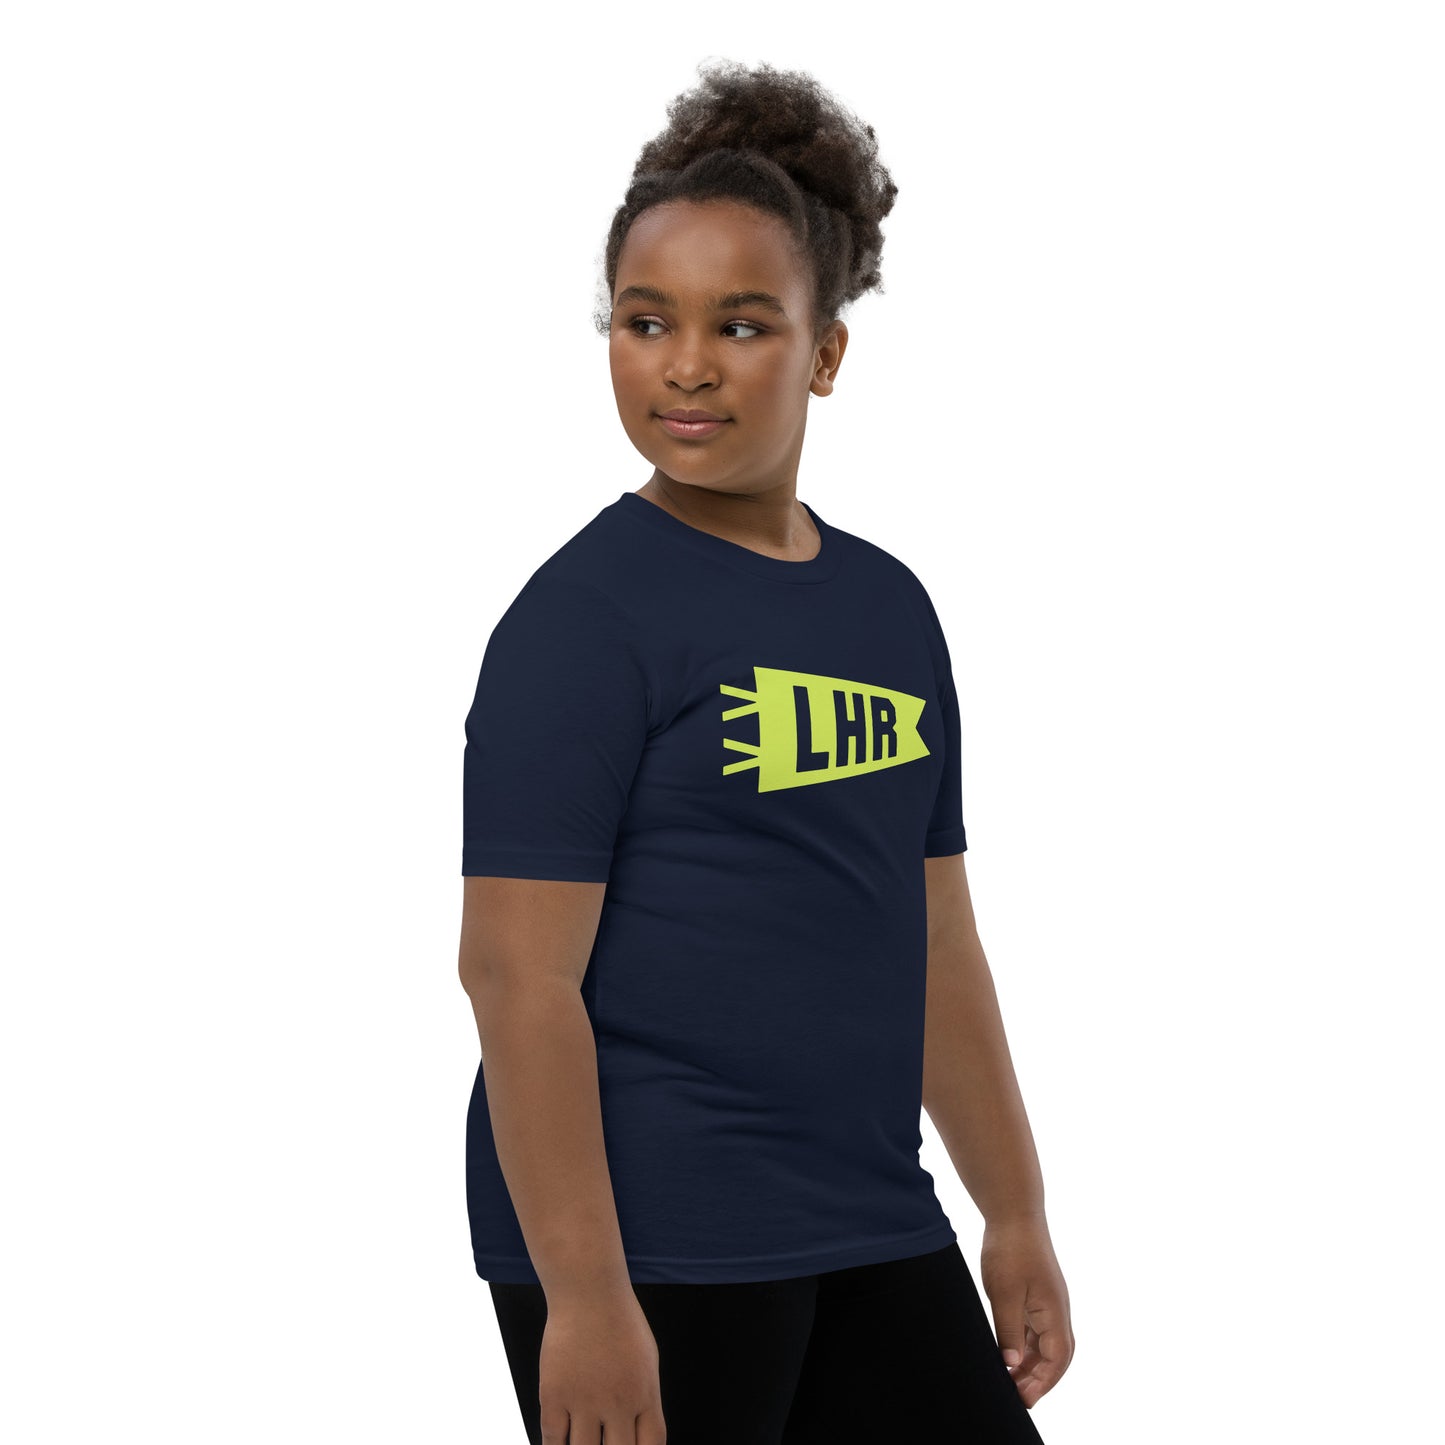 Kid's Airport Code Tee - Green Graphic • LHR London • YHM Designs - Image 03